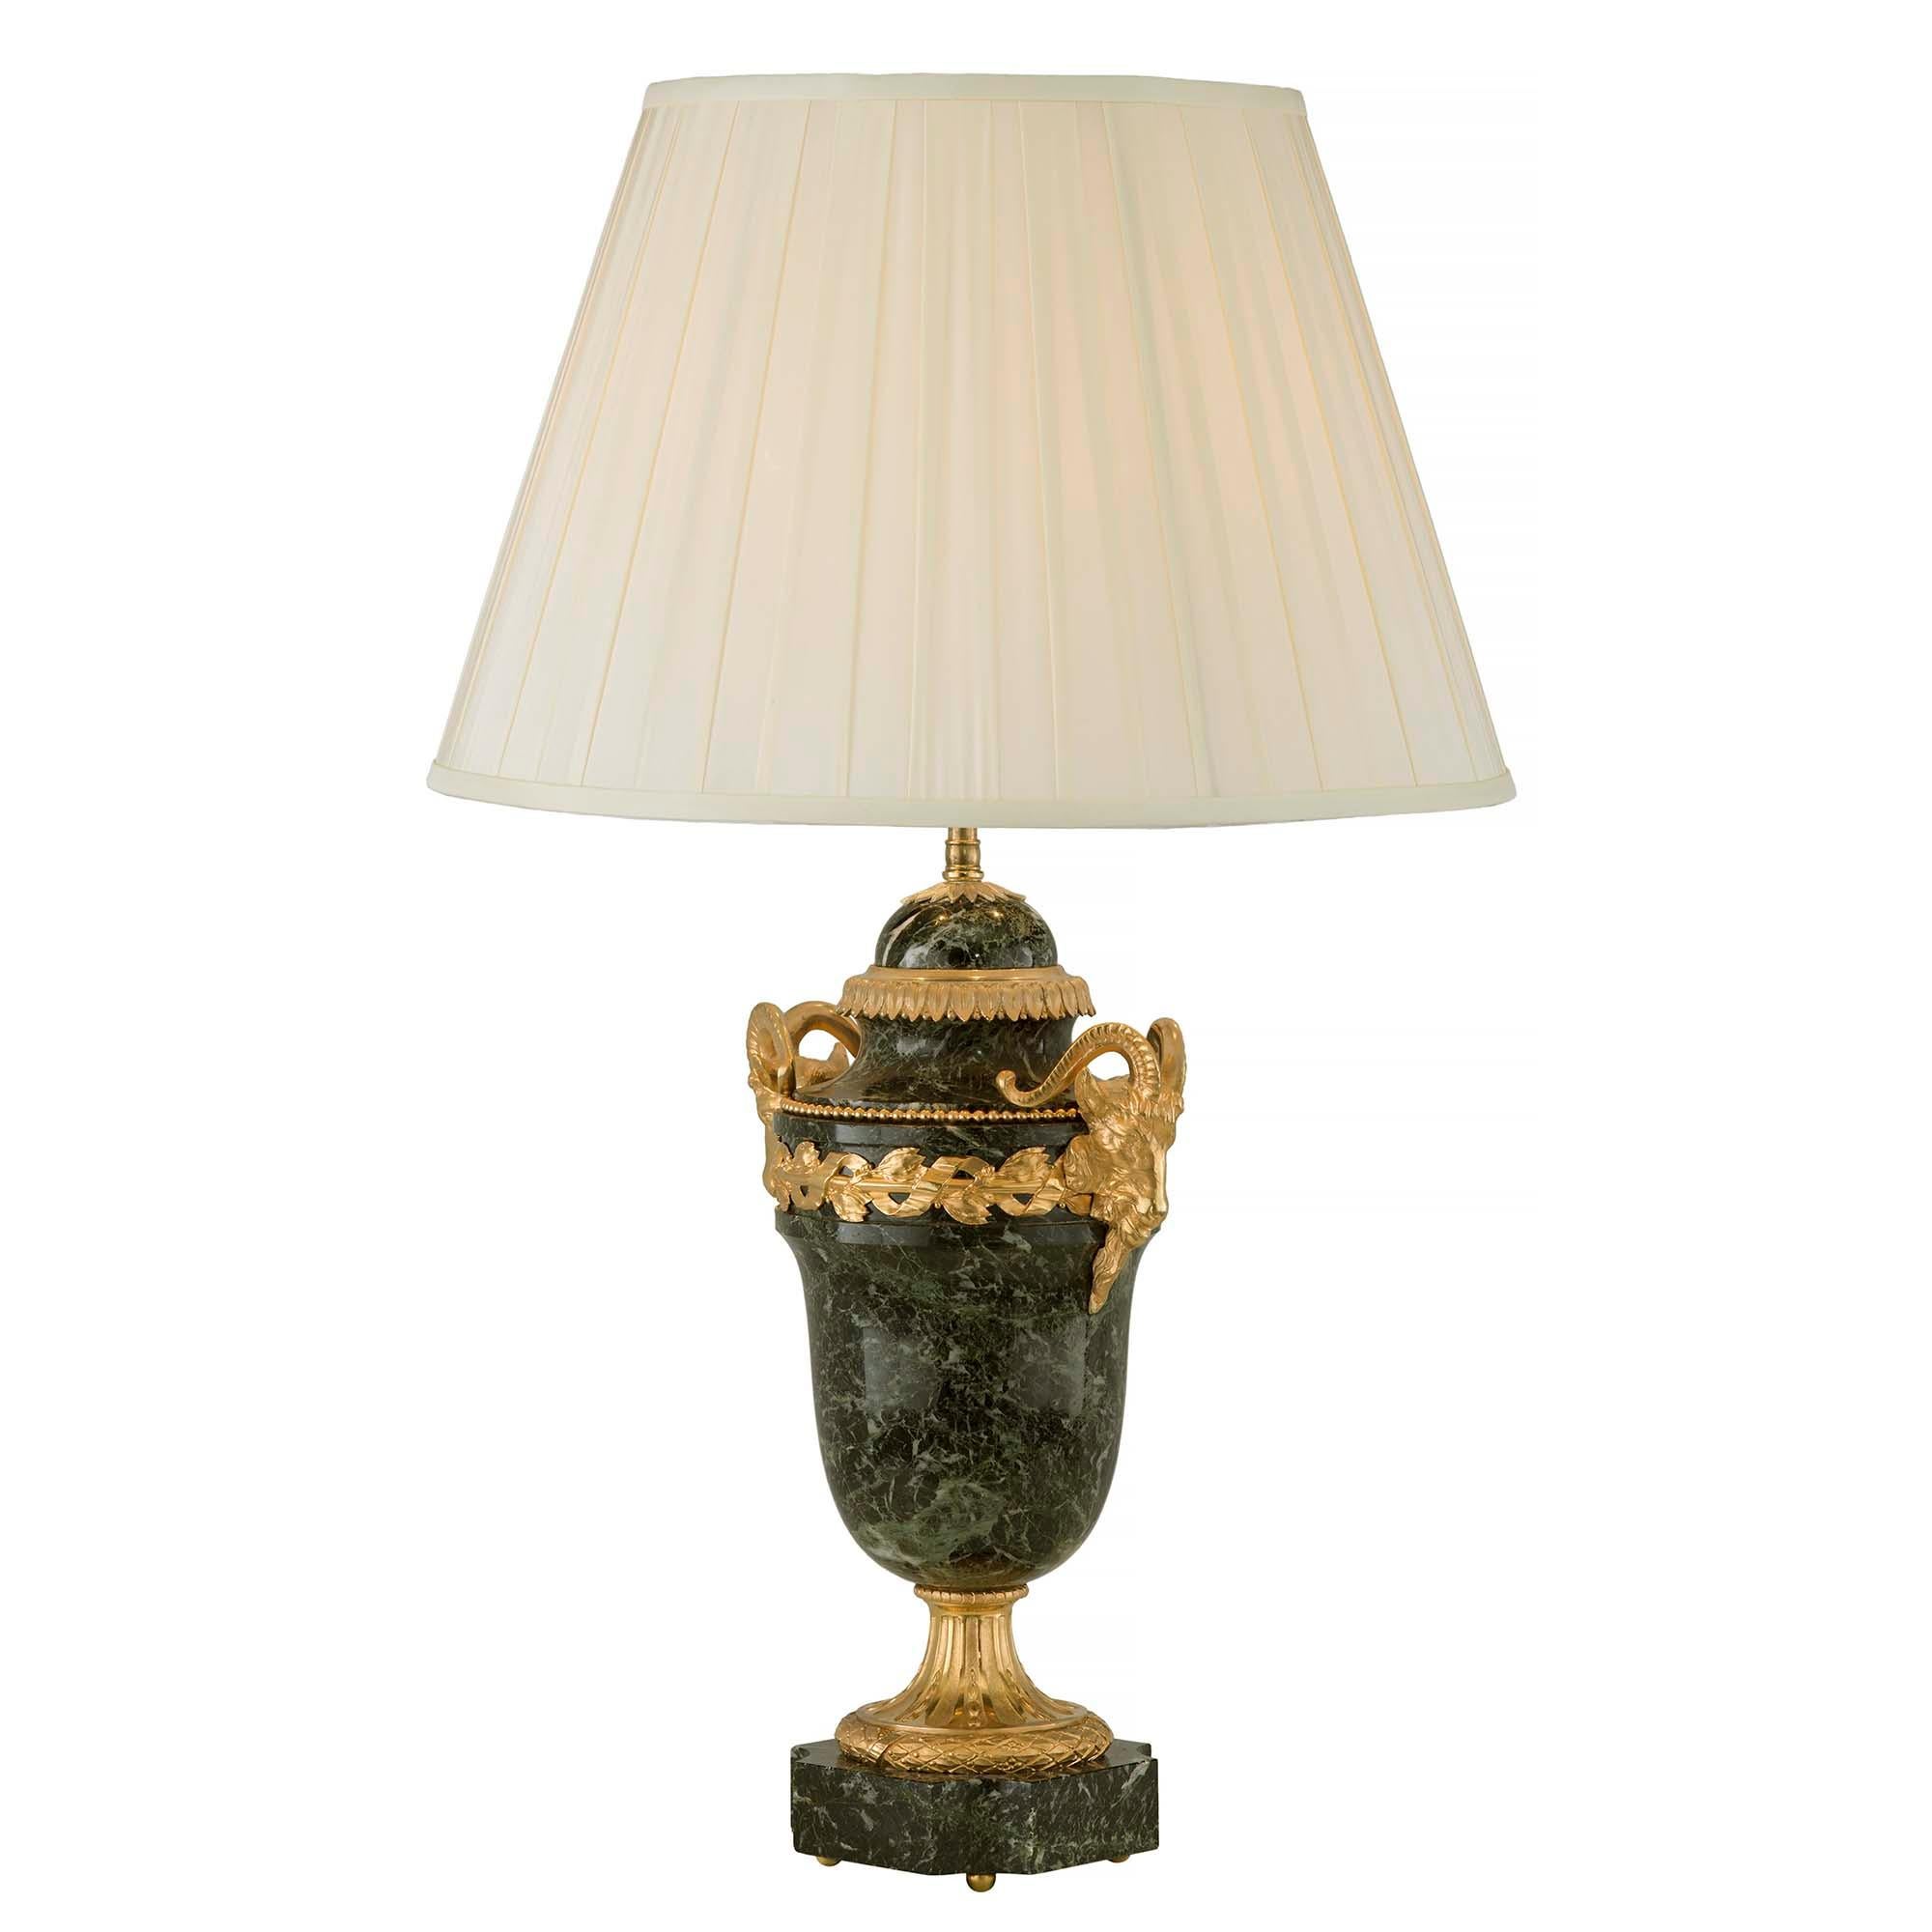 An elegant pair of French 19th century Louis XVI st. ormolu and Vert antique marble lamps. Each lamp is raised on ormolu ball feet below the marble base with concave corners. The richly chased satin and burnished finished socle pedestal with a